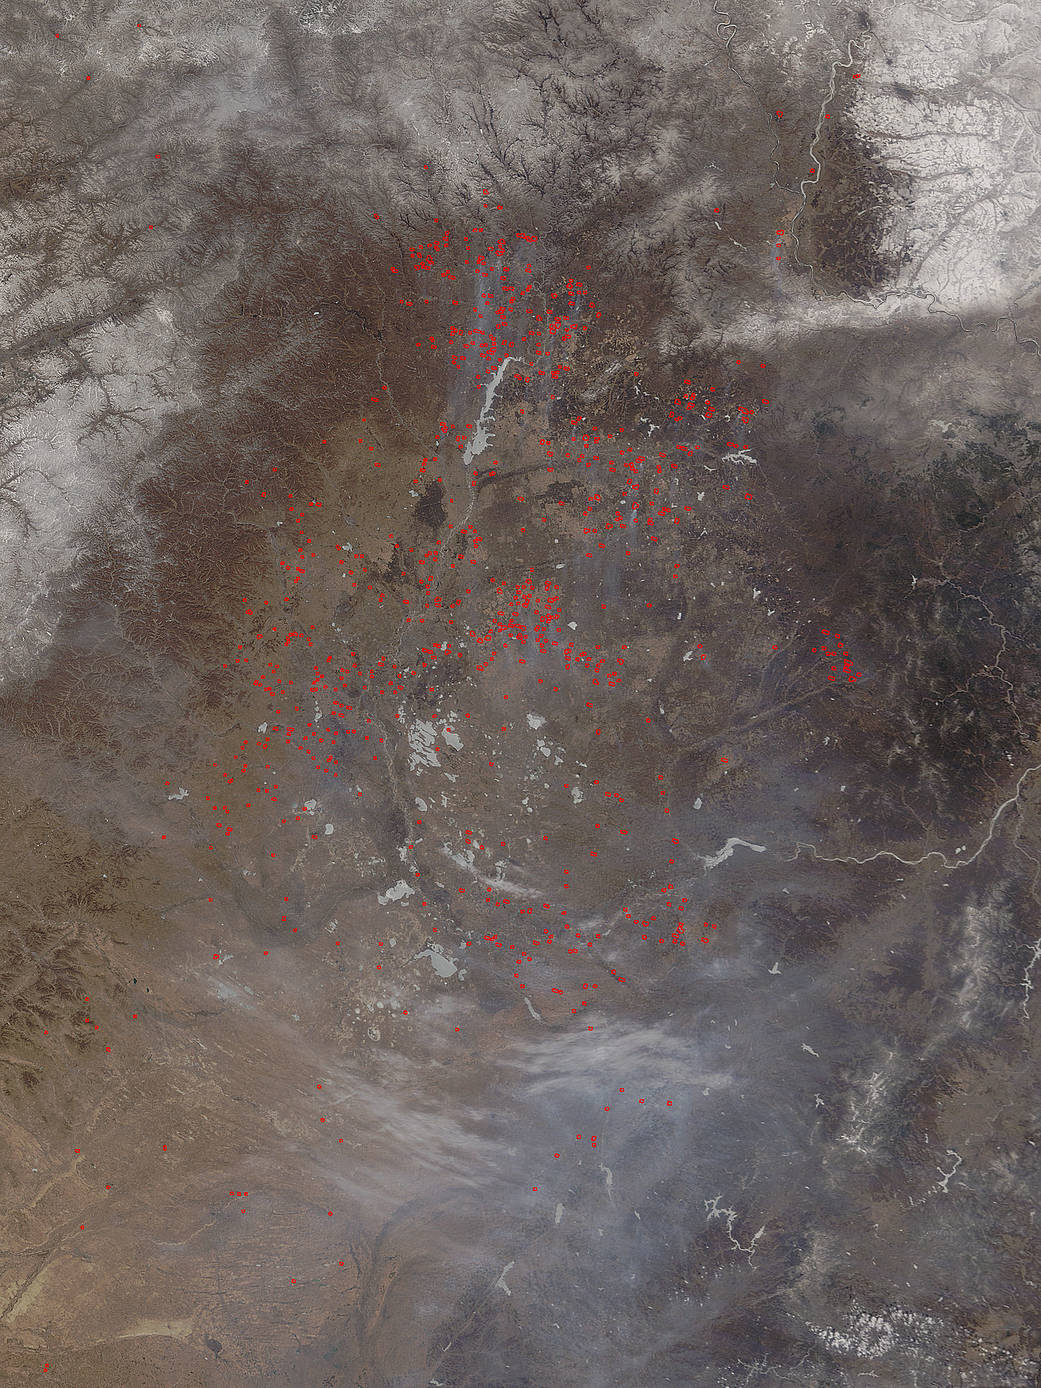 Fires in China